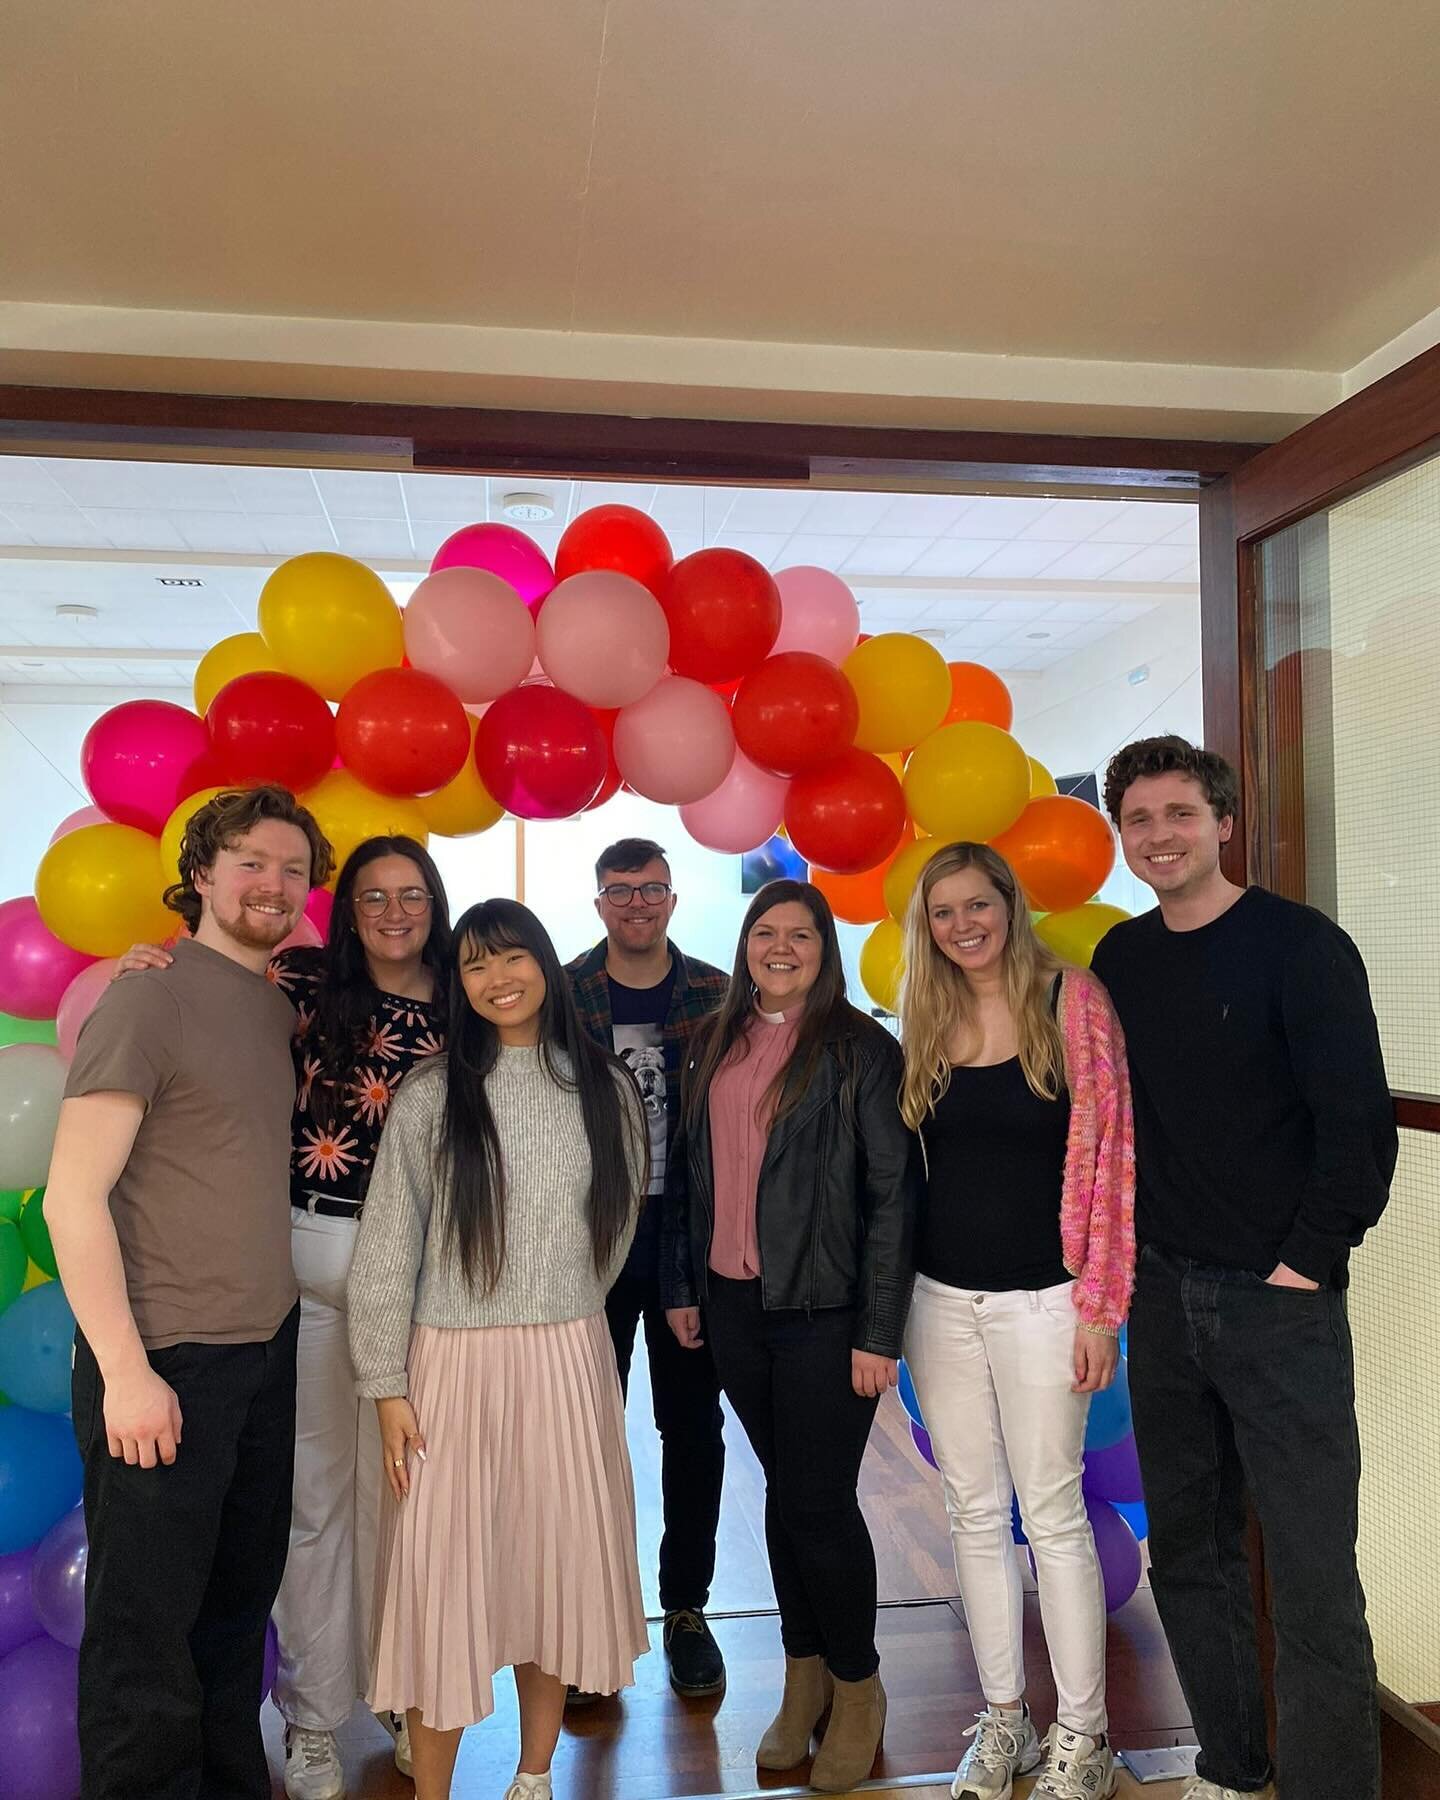 Happy Easter from the Ministry Team at The Hub Belfast! 

We had an amazing time this morning with our church family in The Church of the Resurrection! We celebrated Easter together with breakfast, worship and Holy Communion! 

𝘉𝘶𝘵 𝘎𝘰𝘥 𝘳𝘢𝘪𝘴